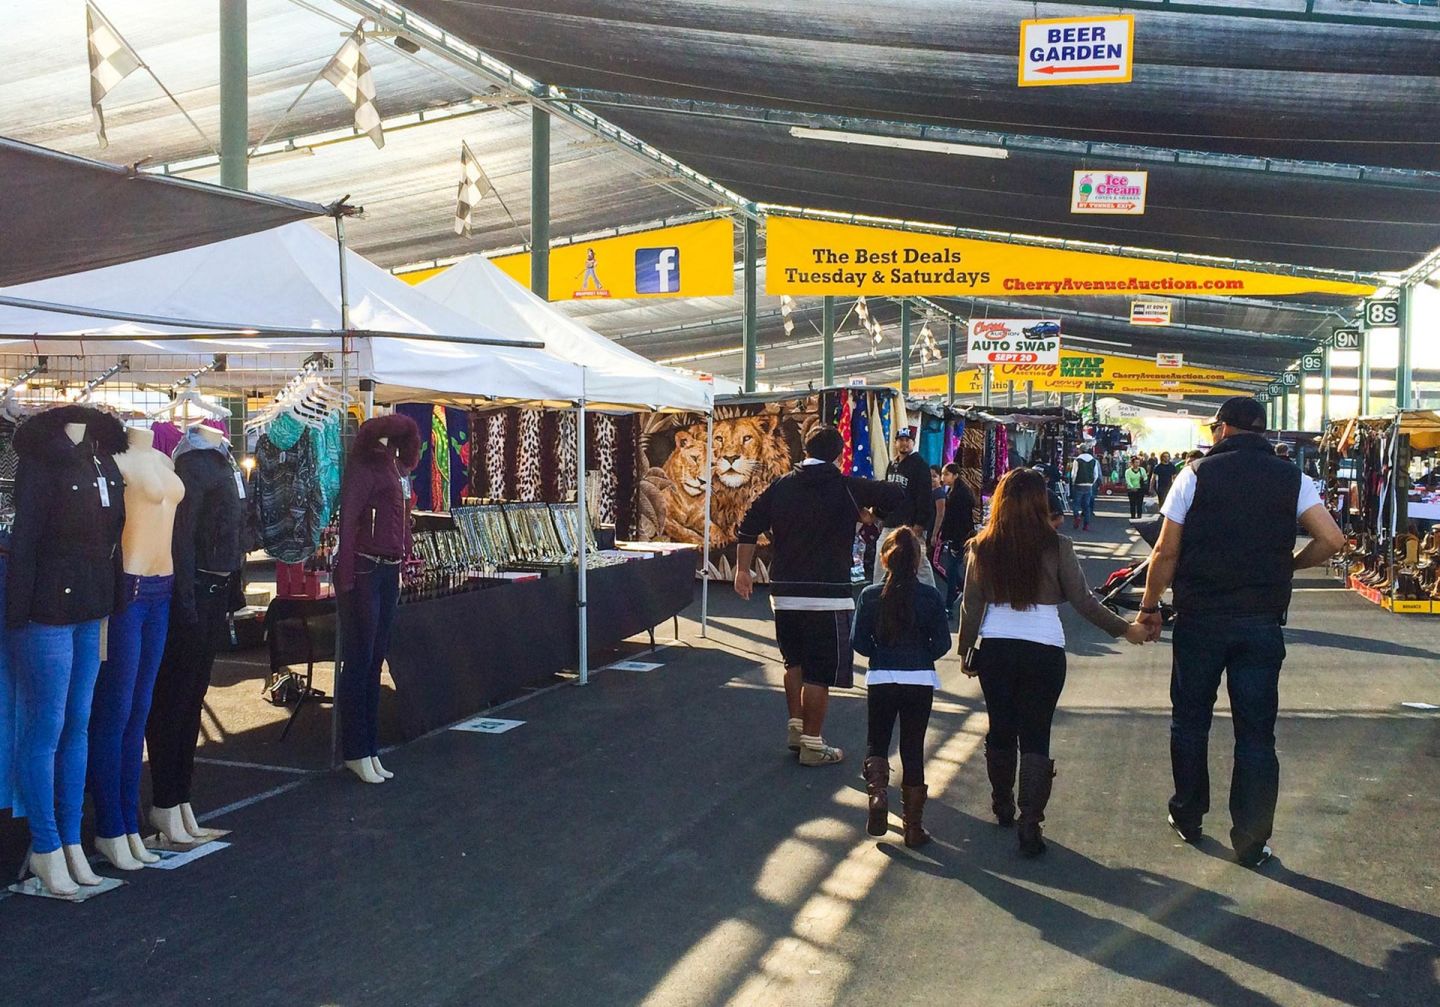 The Cherry Auction’s booths, full of clothing, furniture, food and cars, sprawl across 54 acres in southern Fresno.